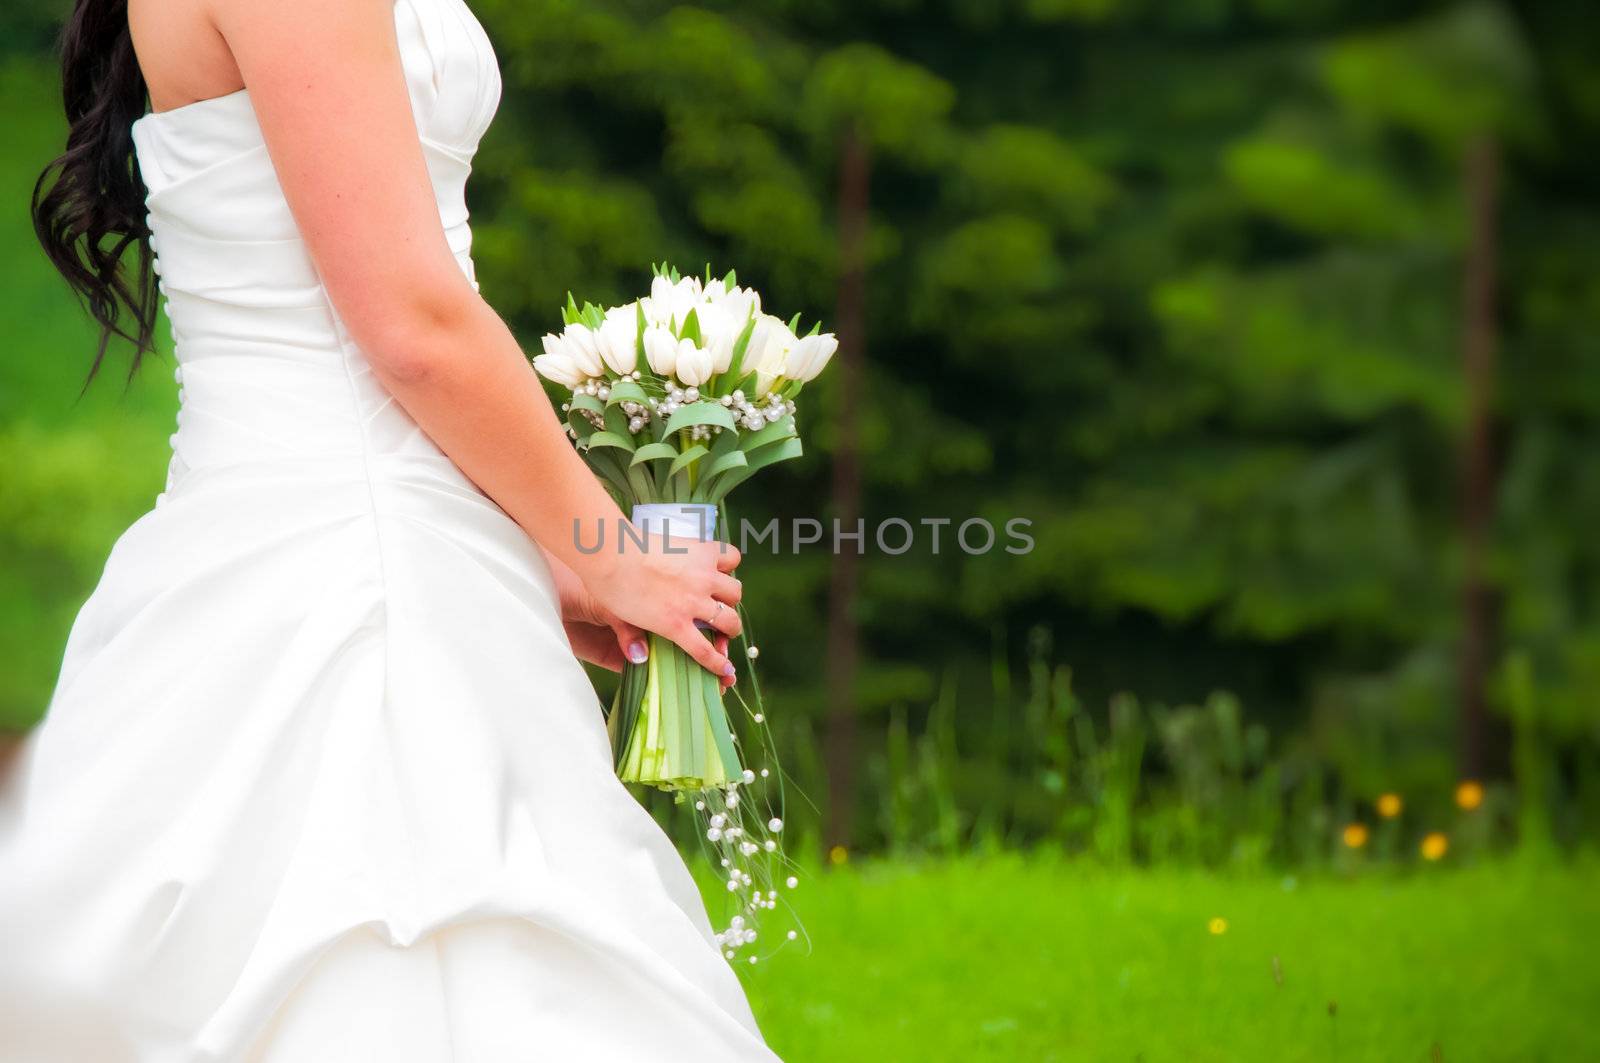 Detail of the bride in white dress with flowers, green grass and trees background